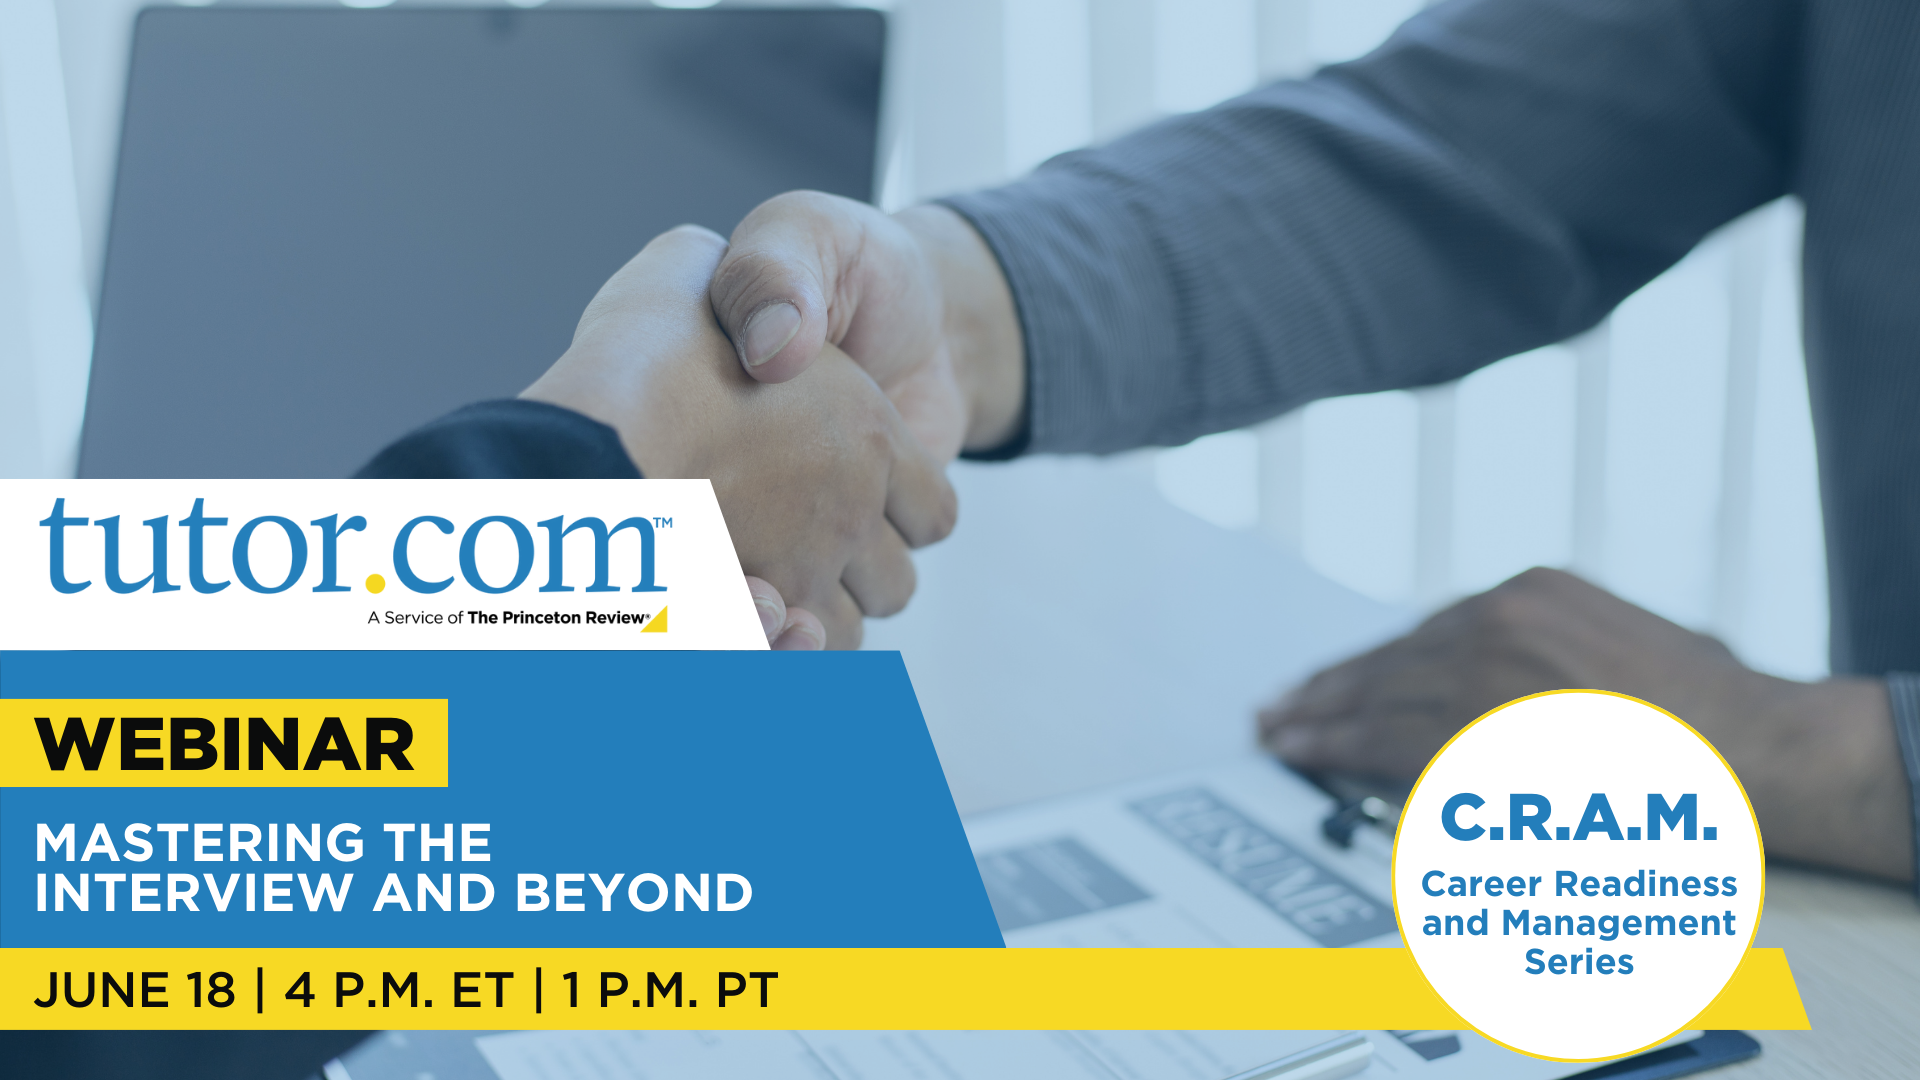 Tutor.com: A Service of The Princeton Review, Webinar: Mastering the Interview and Beyond, June 18 | 4 P.M. ET | 1 P.M. PT, C.R.A.M. (Career Readiness and Management) Series